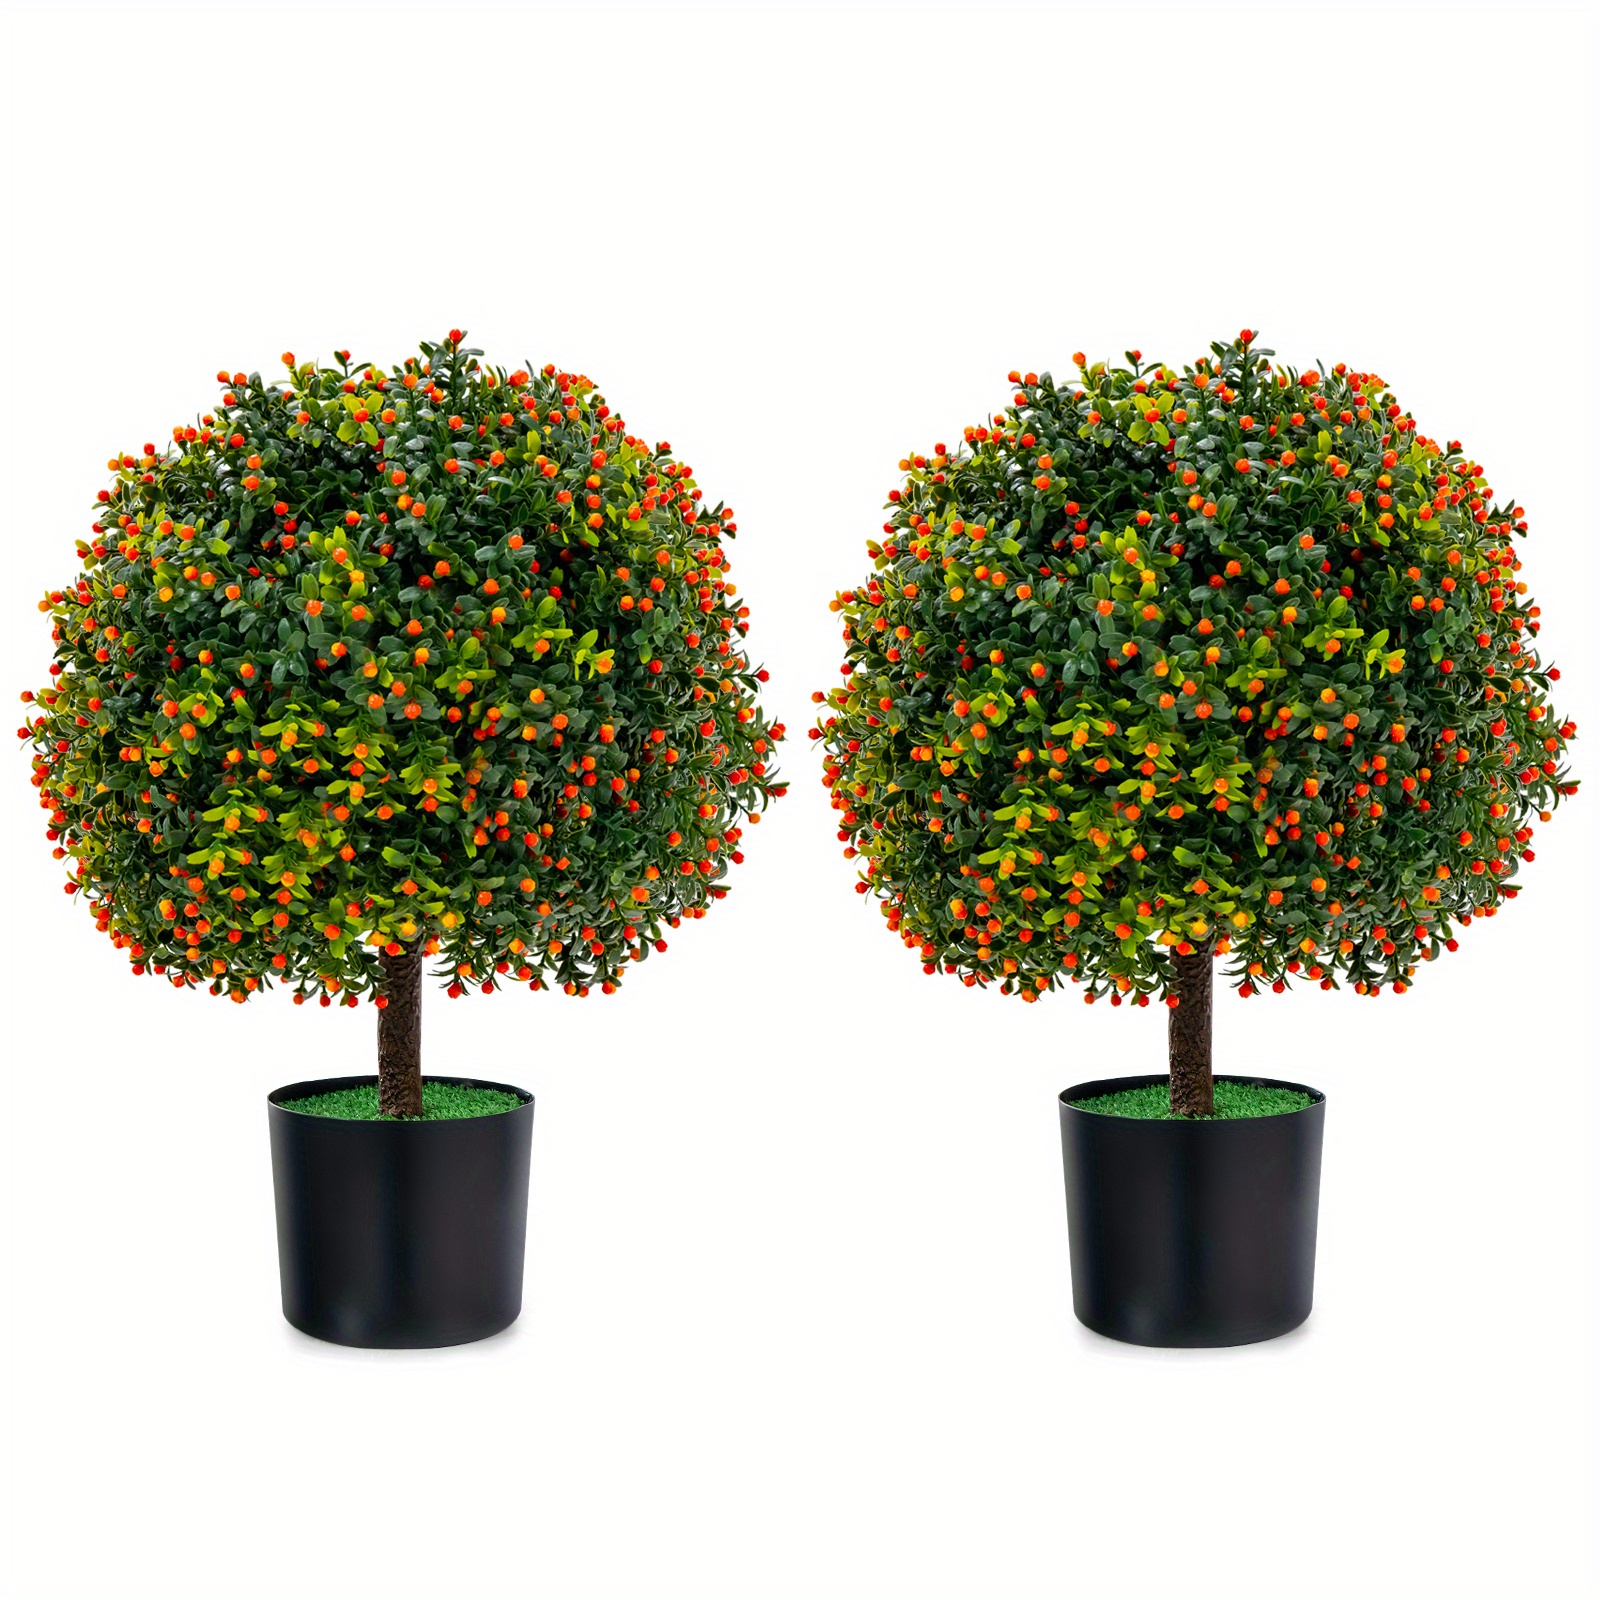 

Multigot 22" Artificial Boxwood Topiary Ball Tree 2-pack Faux Potted Plant W/ Orange Fruit